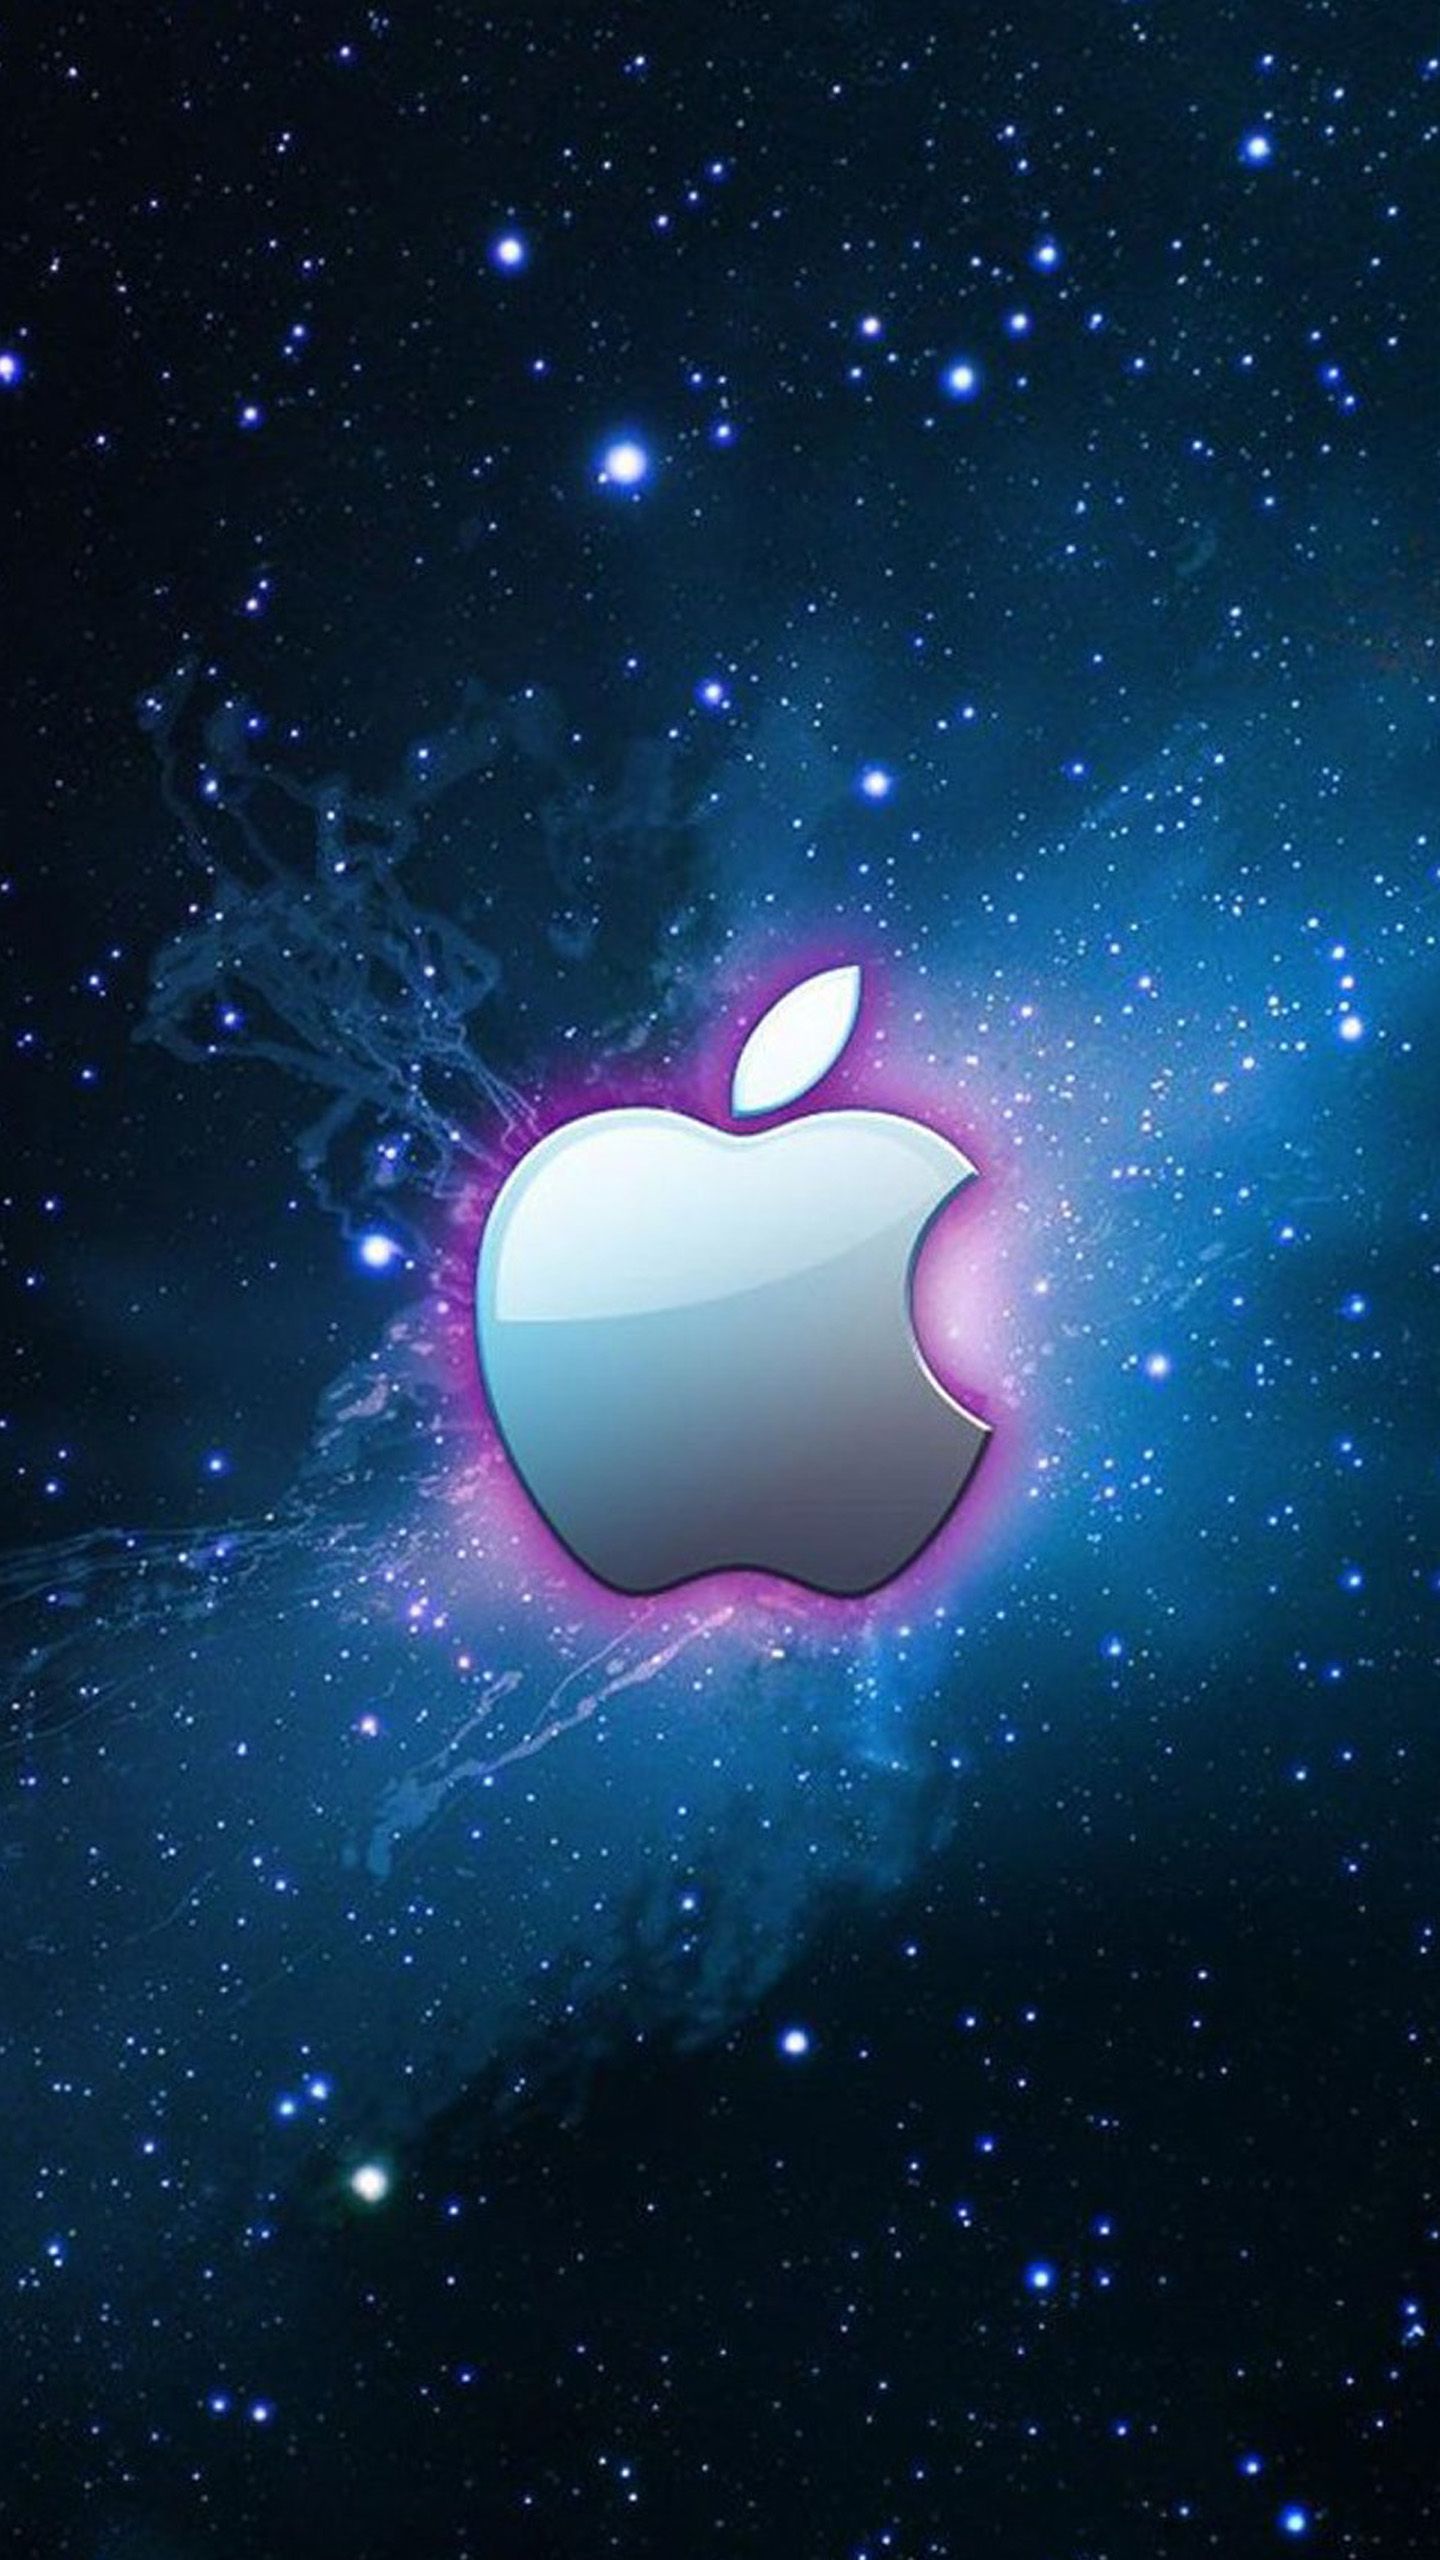 Awesome Apple logo 1 Galaxy S6 Wallpaper. Galaxy S6 Background